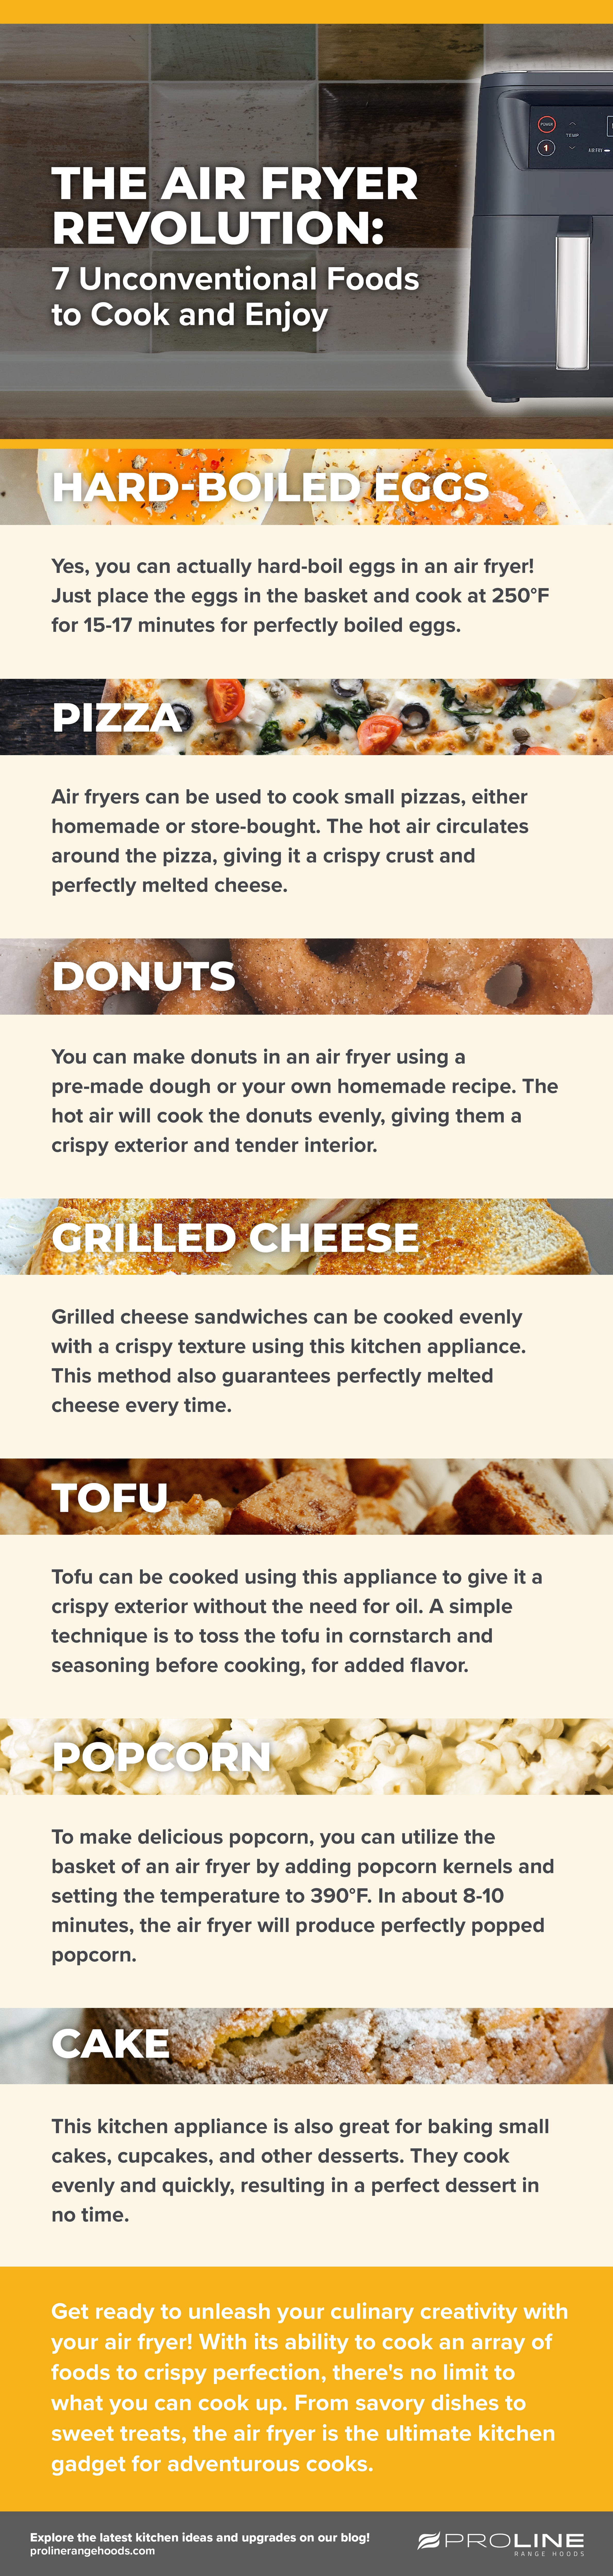 things you wouldn't think to cook in an air fryer infographic